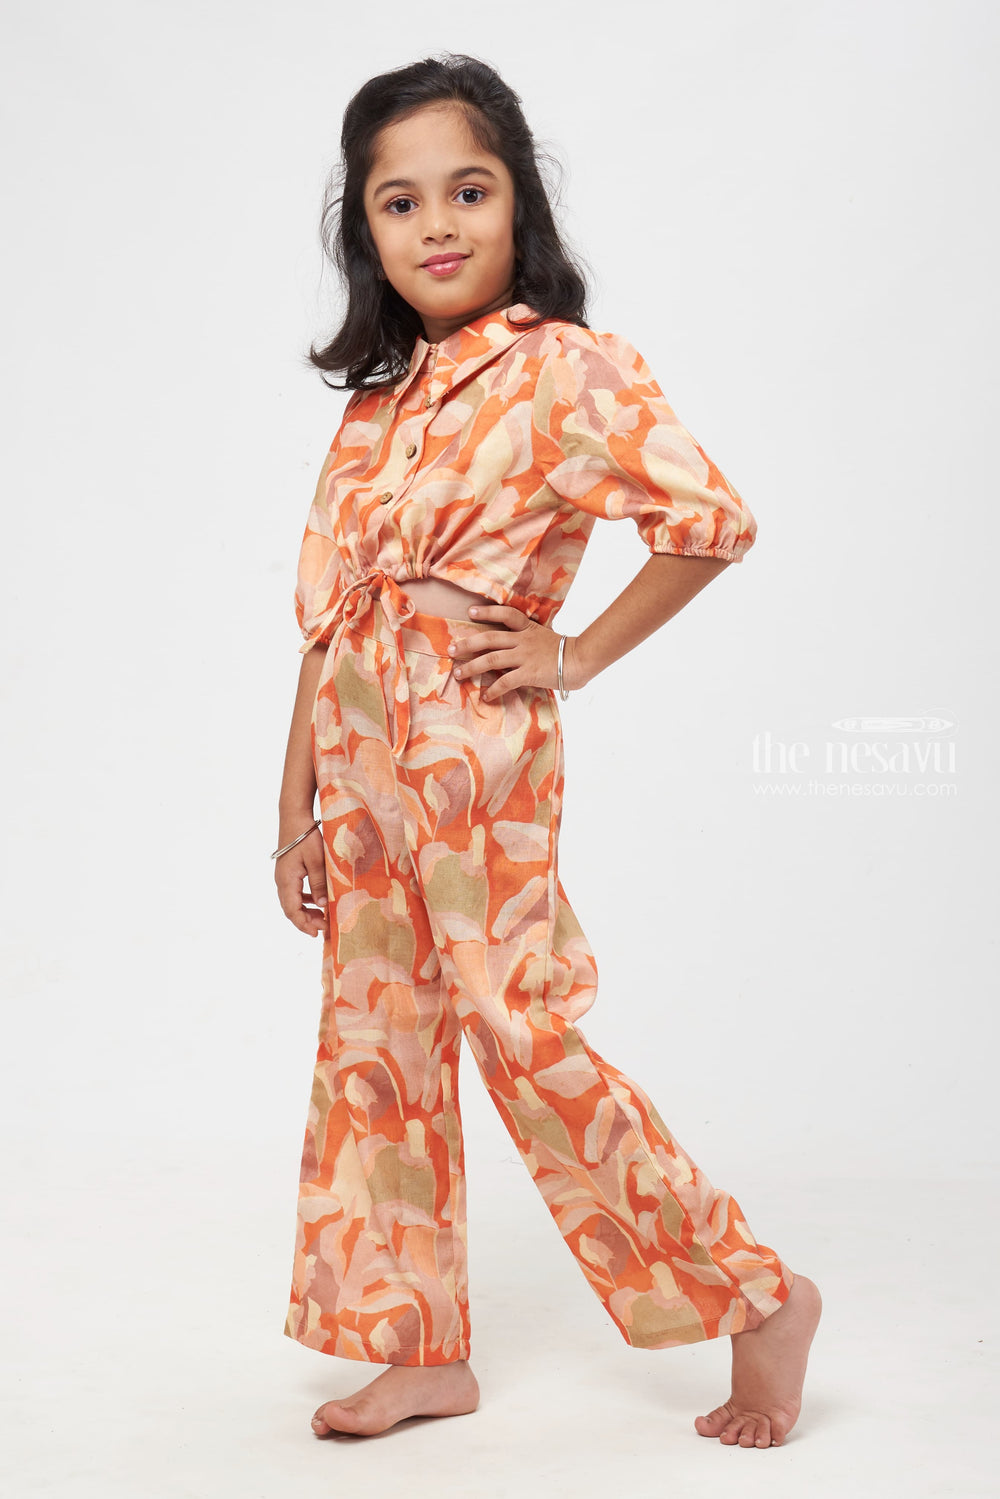 The Nesavu Girls Sharara / Plazo Set Orange Watercolor Elegance Two-Piece Outfit with Whimsical Patterns for Girls Nesavu Watercolor-Inspired Two-Piece Set | Artistic Kids Wear Collection | Trendy Tots - The Nesavu